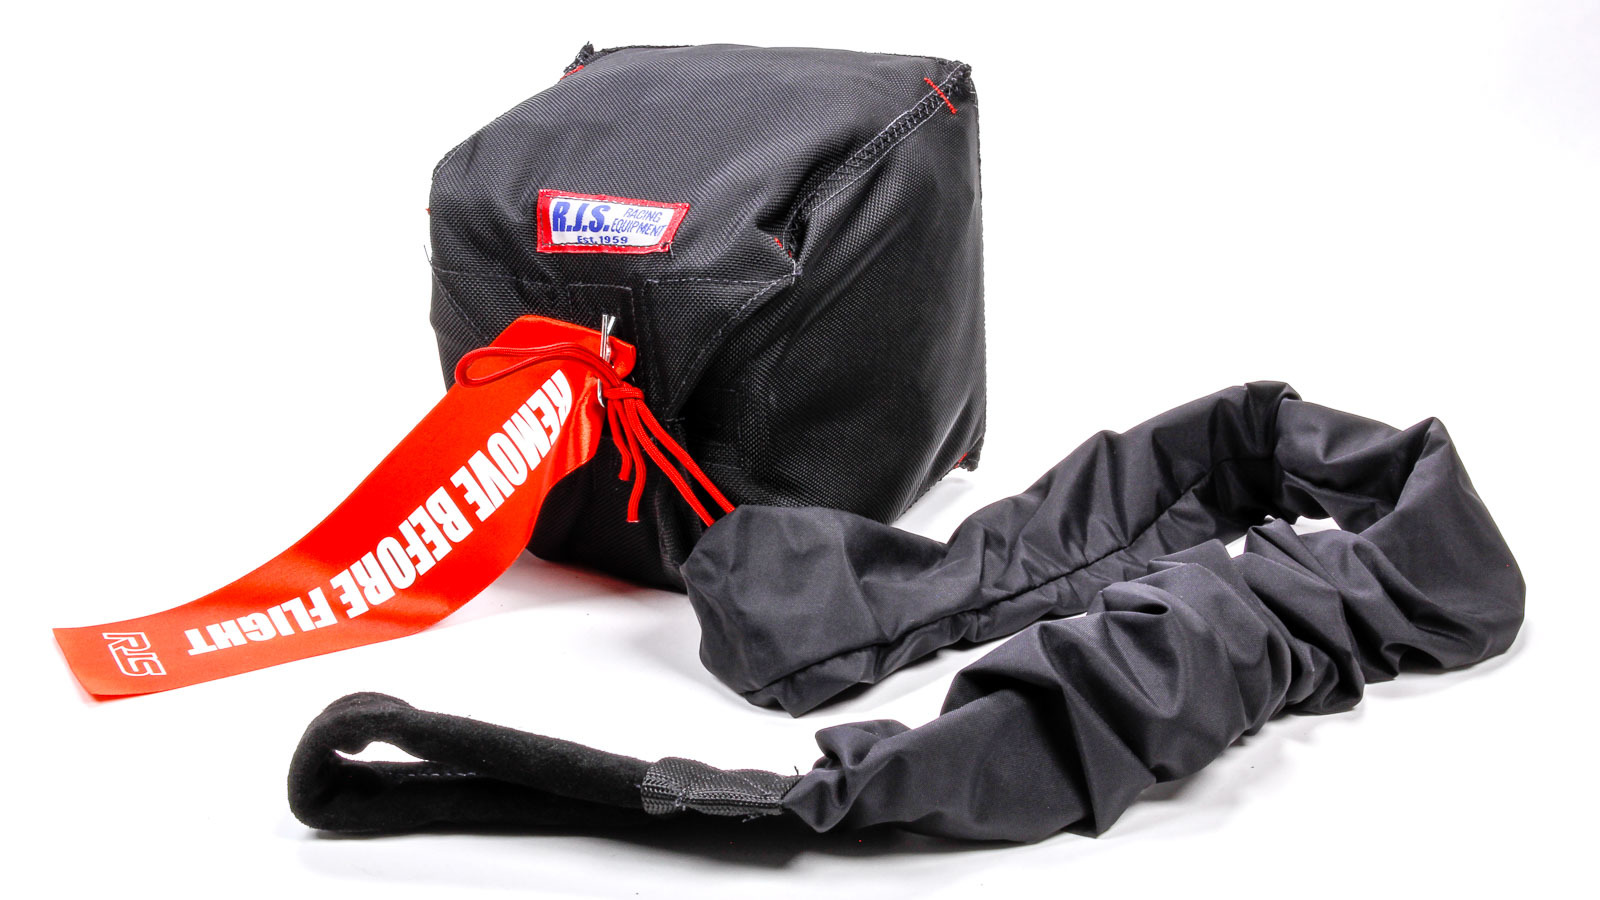 RJS, Qualifier Chute W/ Nylon Bag and Pilot Red